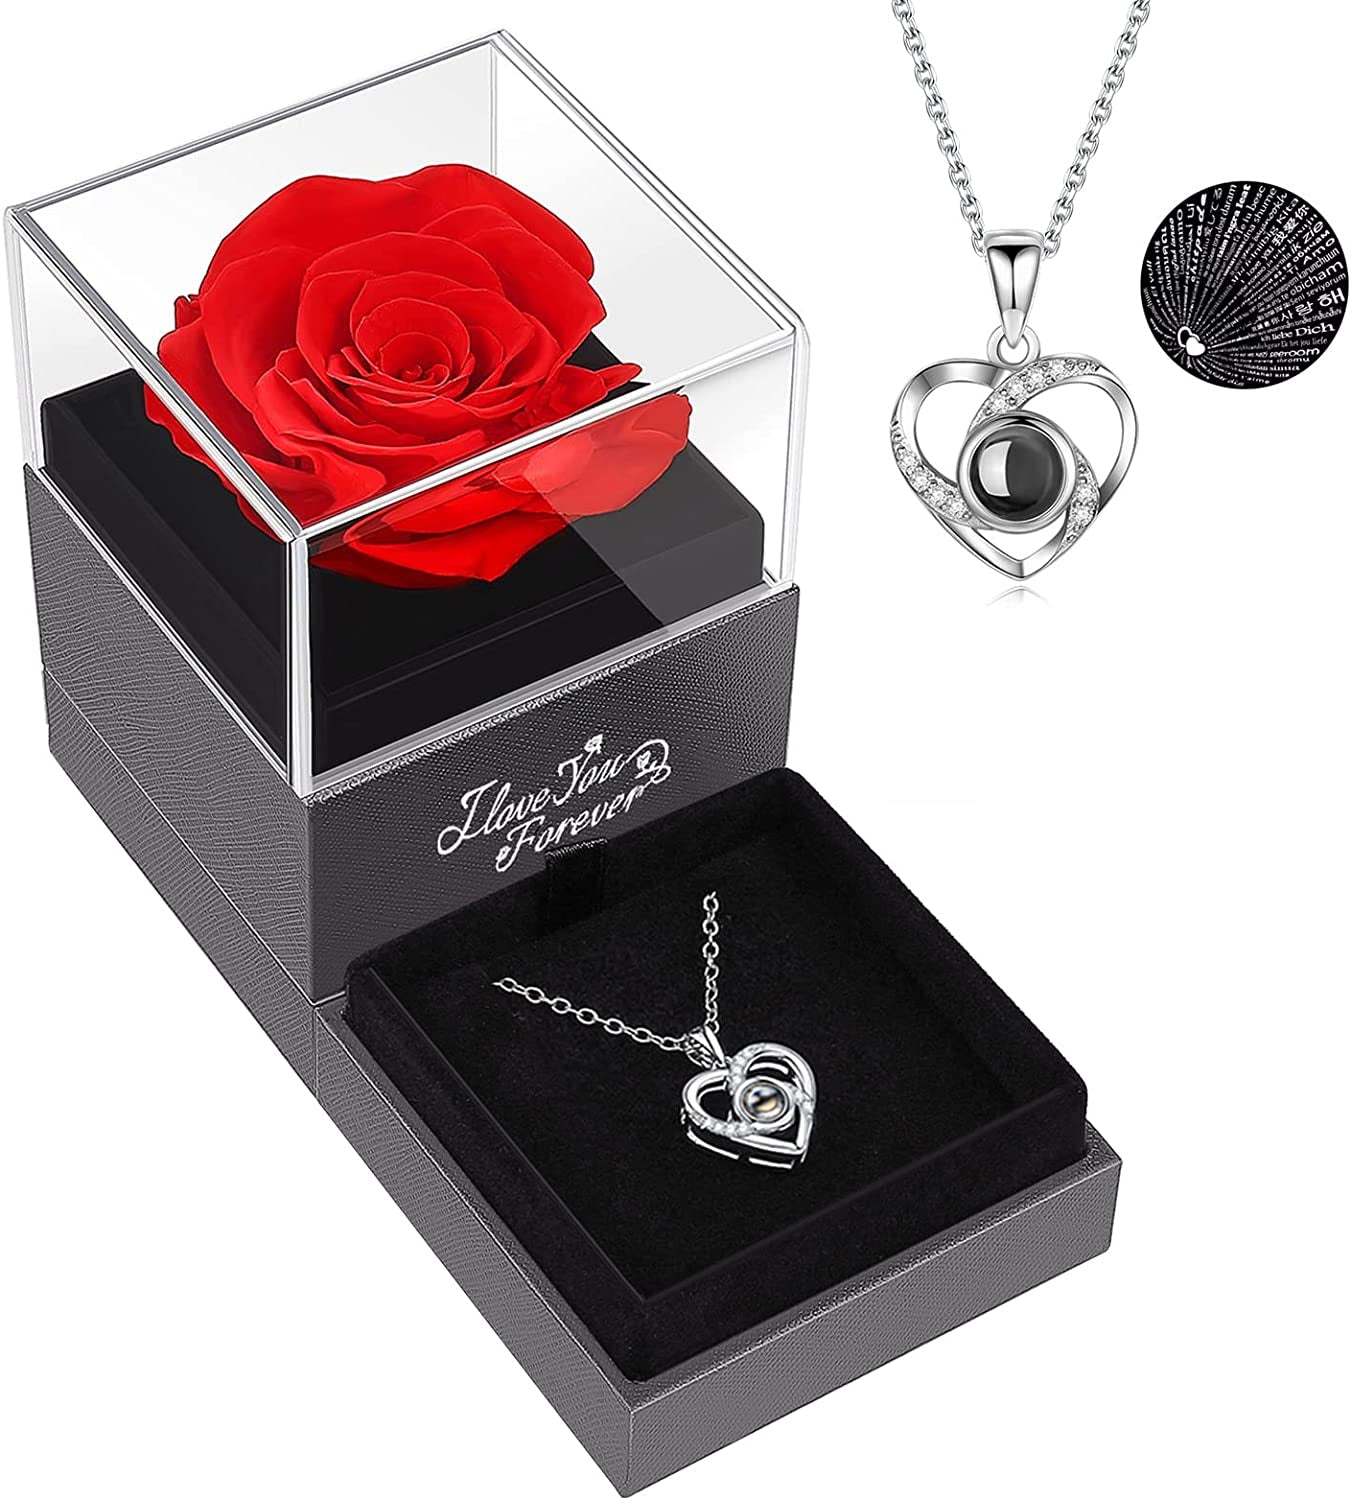 Valentines Day Gifts for Her -Preserved Real Red Rose with I Love You Necklace -Eternal Flowers Gifts for Women Mom Wife Girlfriend, Mothers Day Christmas Anniversary Birthday Gifts for Women